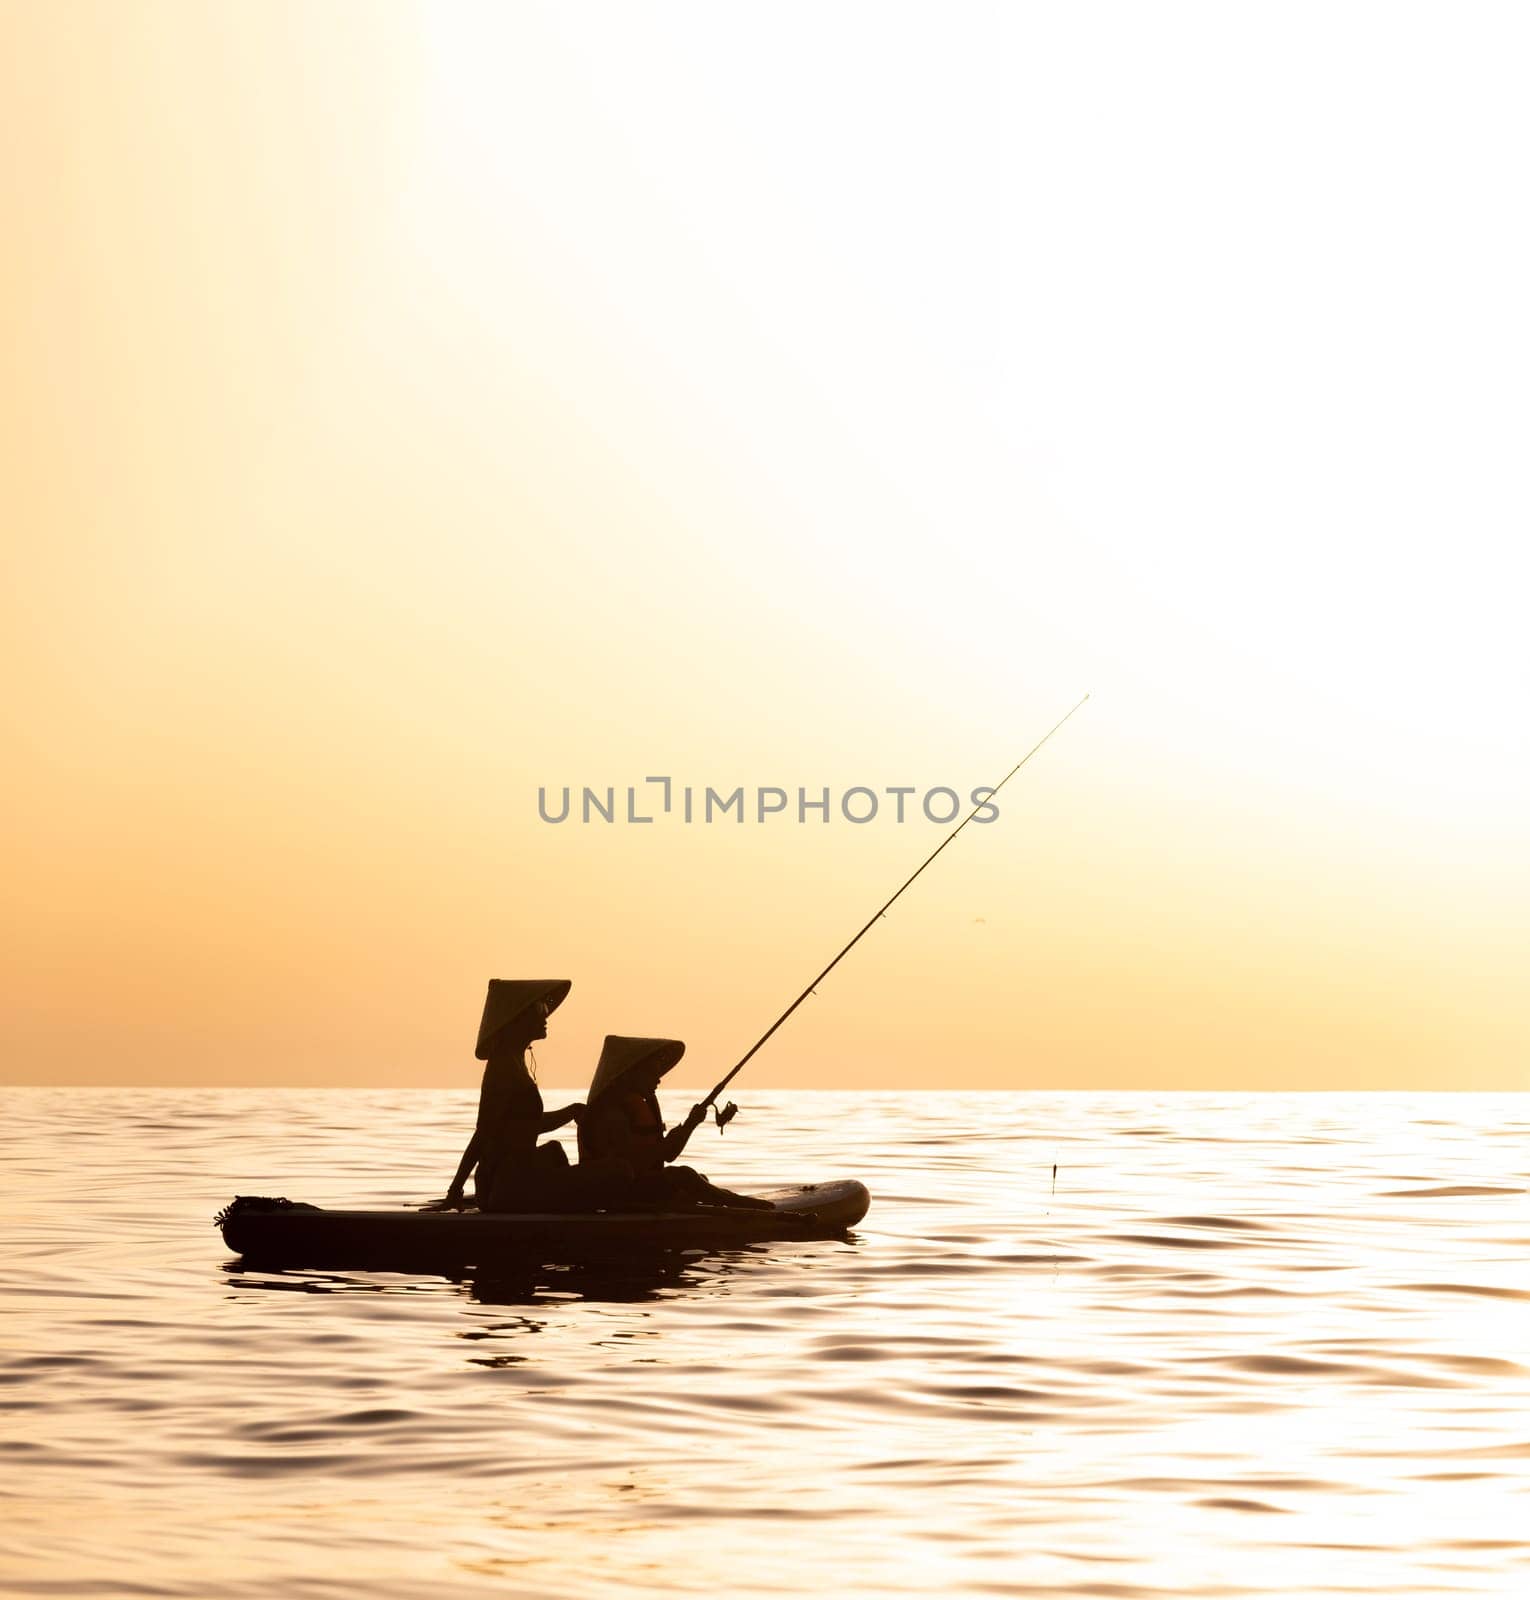 a woman with a child on a sup board in the sea swim against the background of a beautiful sunset, Standup paddleboarding by Rotozey